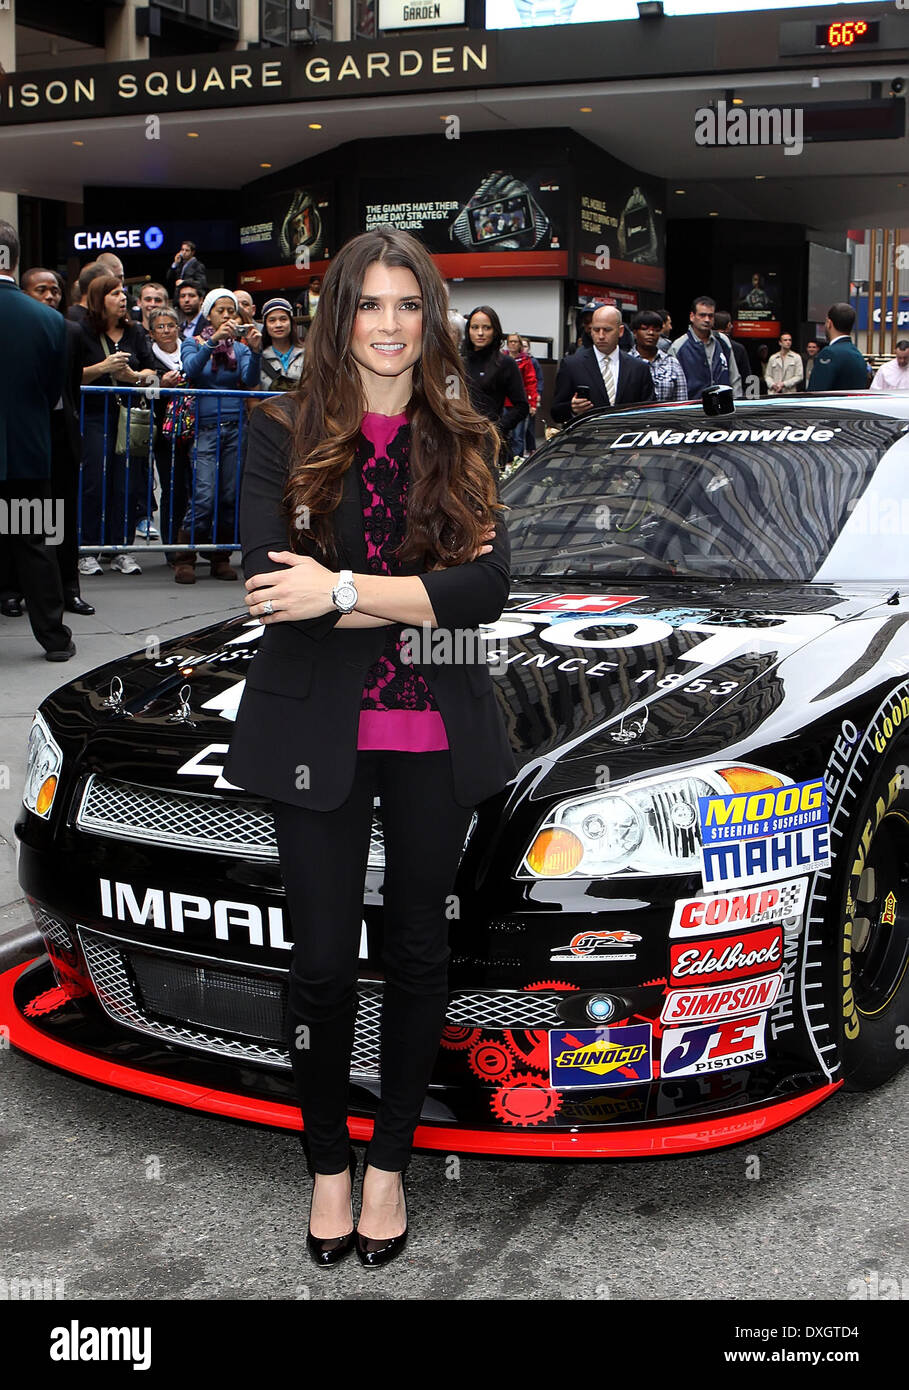 Danica Patrick Launch Of The New Tissot Lobby Clock Held At The